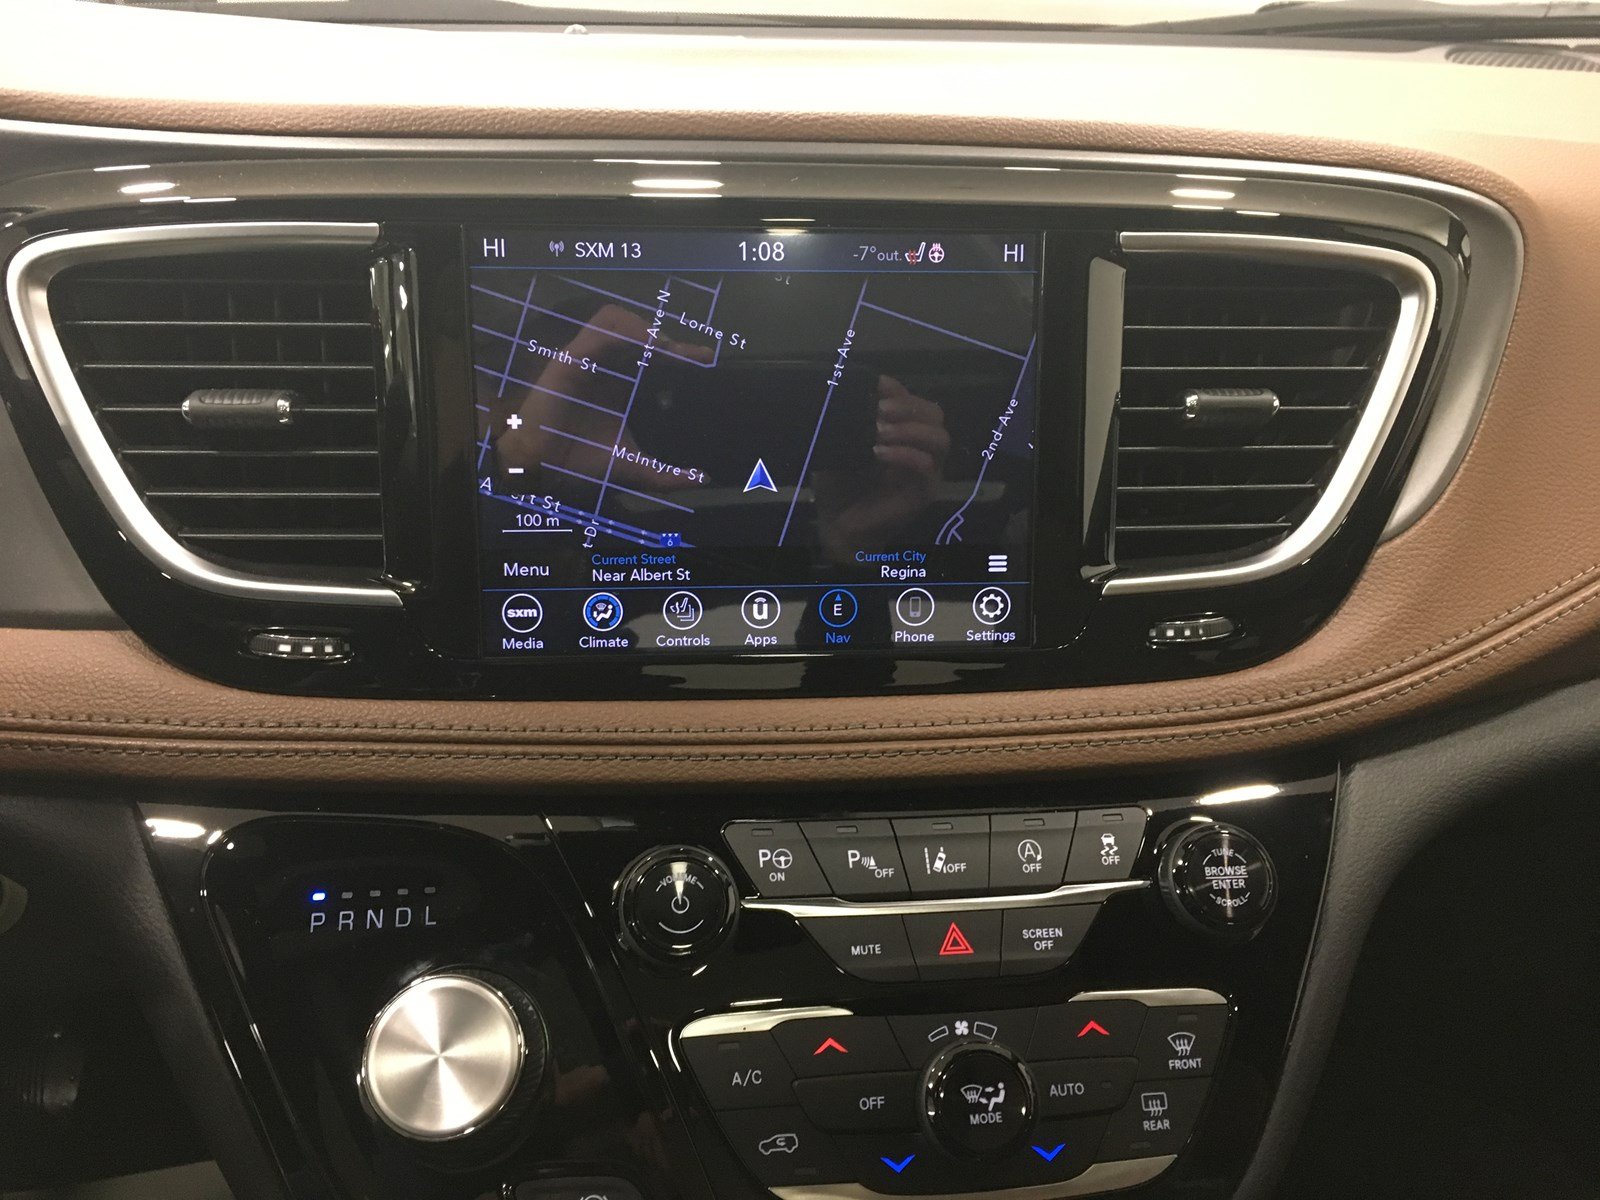 New 2020 Chrysler Pacifica Limited Sunroof Navigation